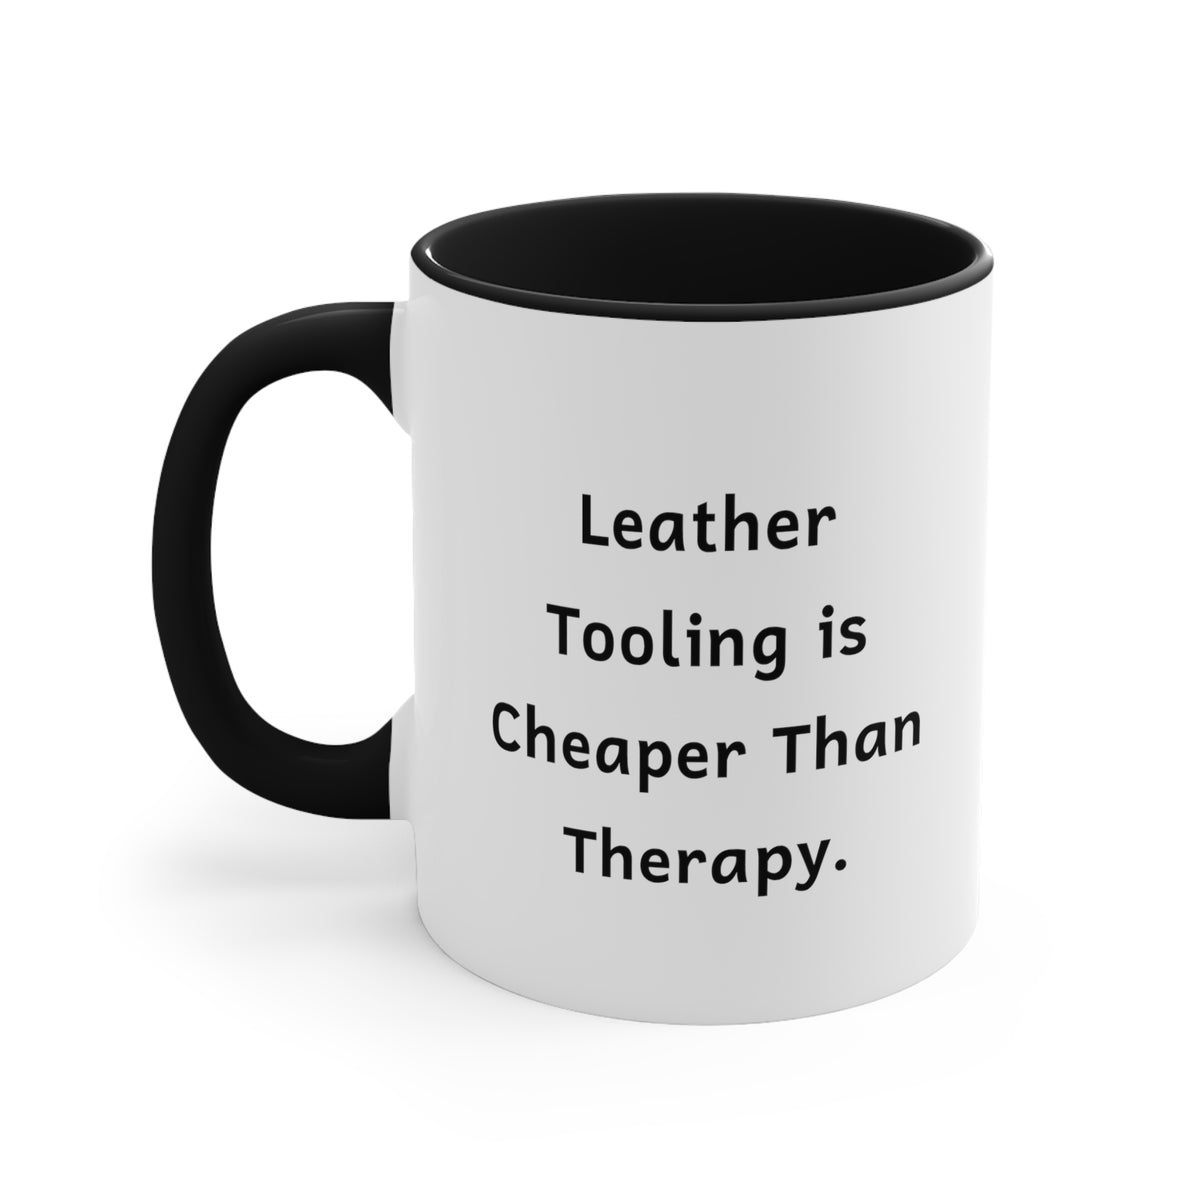 Funny Leather Tooling Gifts, Leather Tooling is Cheaper Than Therapy, Cool Birthday Two Tone 11oz Mug From Friends, Hobby supplies, Hobby equipment, Hobby tools, Hobby kits, Gift ideas for hobbyists